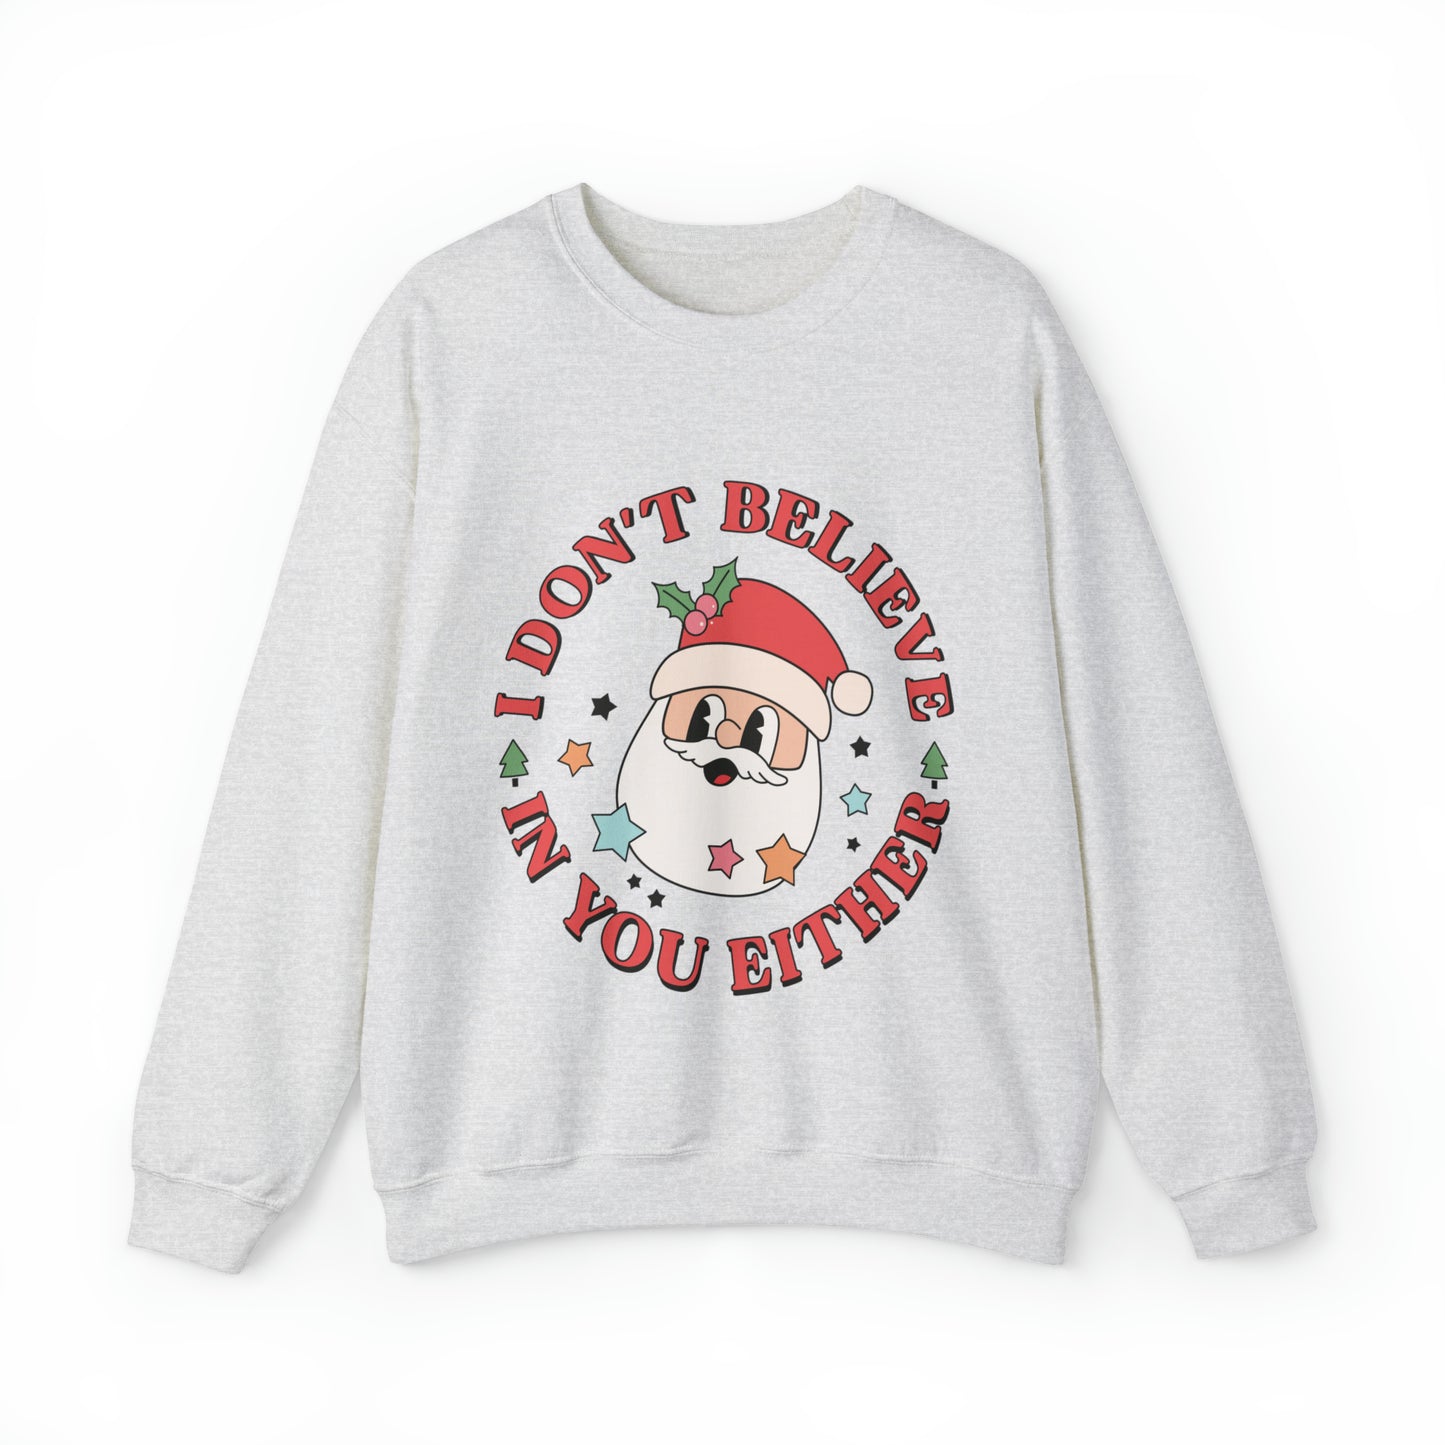 Santa I don't believe in you either Women's funny Christmas Crewneck Sweatshirt